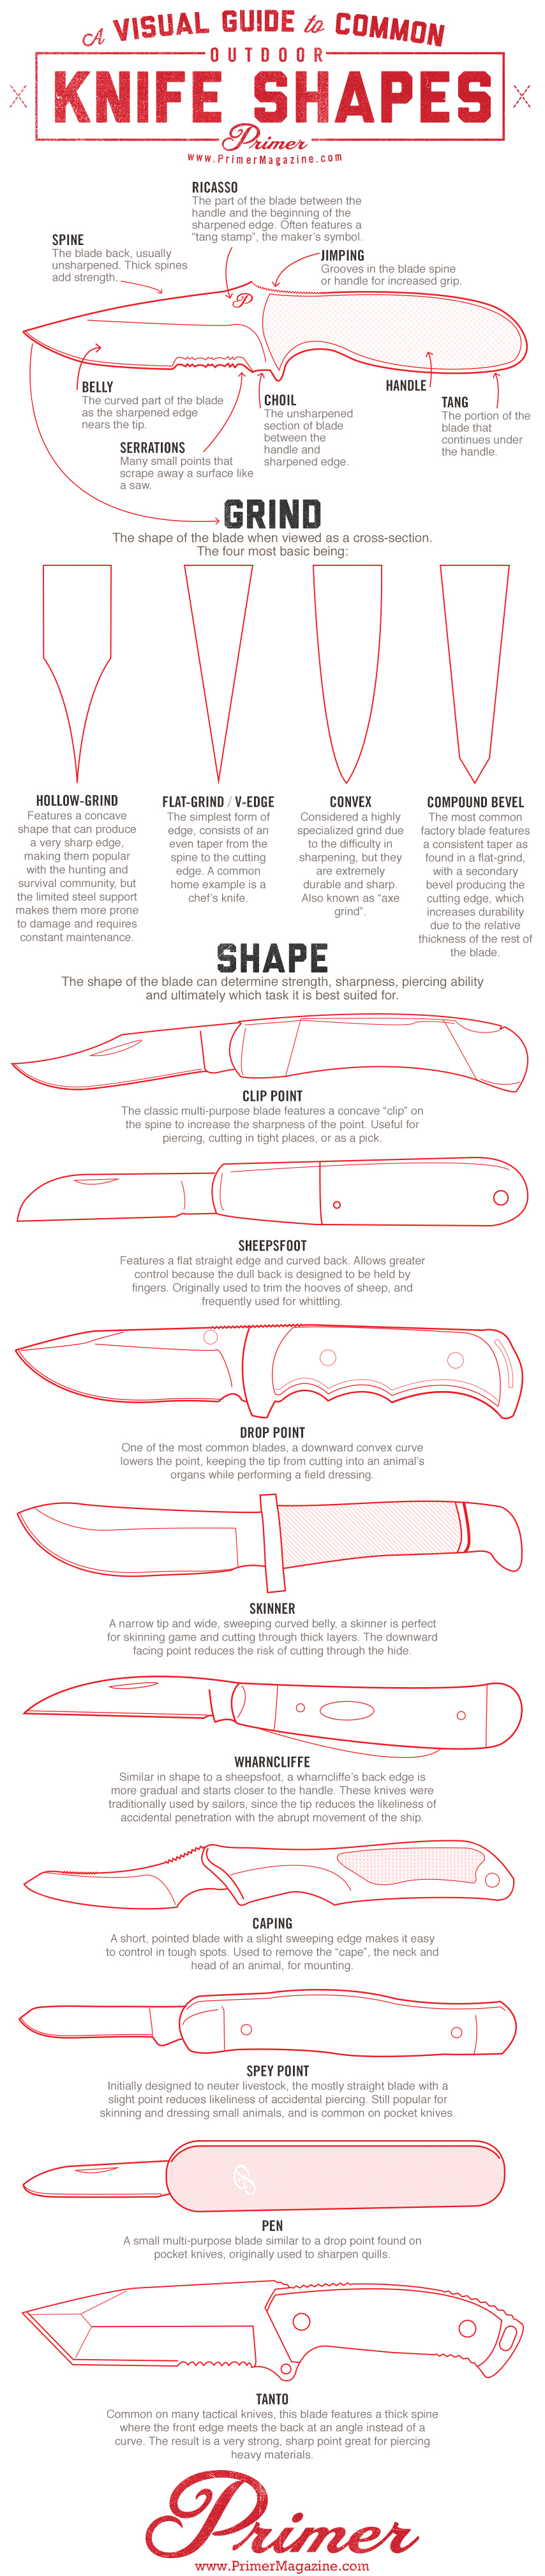 common outdoor knife shapes, clip point, drop point, sheepsfoot, skinner, wharncliffe, caping, spey point, pen knife, tanto, parts of a knife